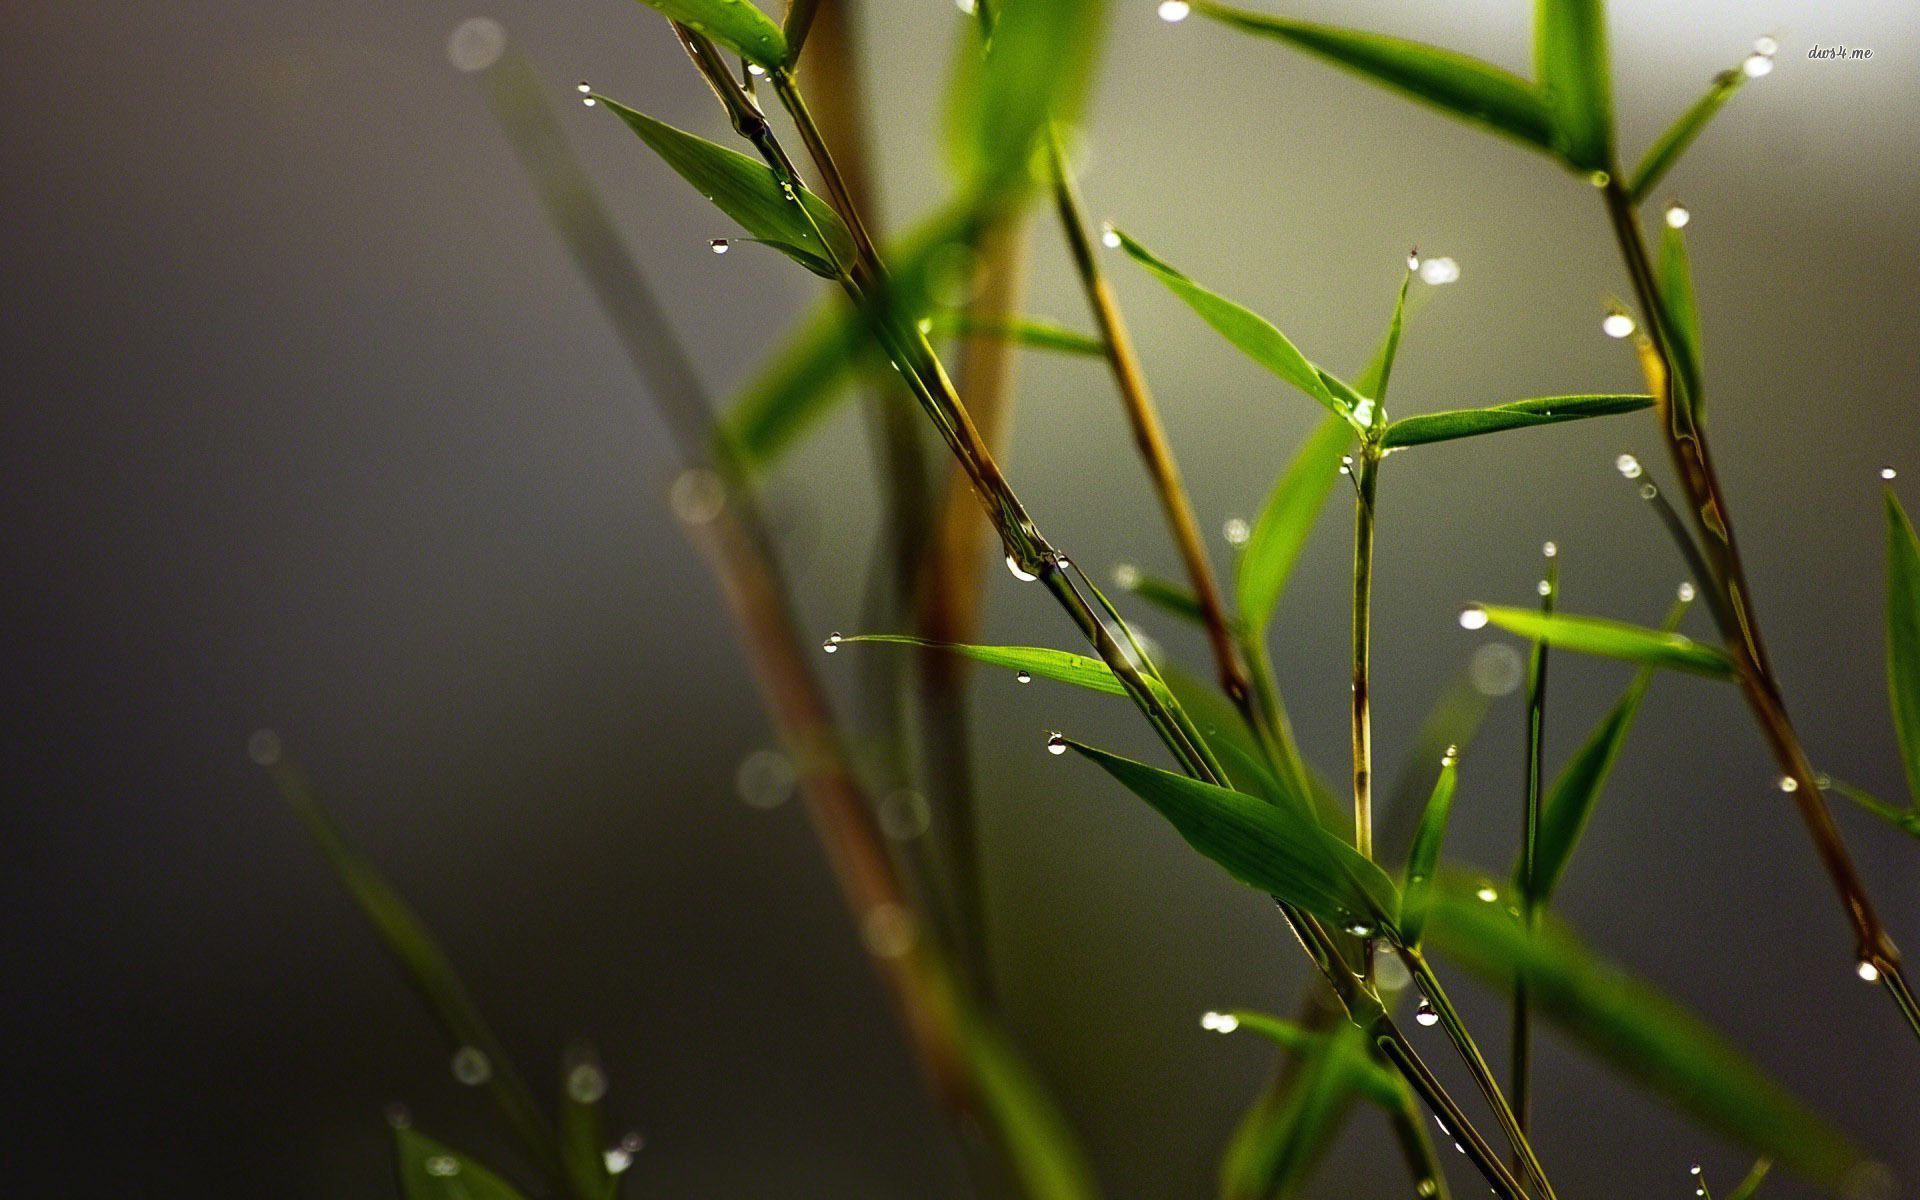 Dew drops on bamboo wallpaper - Photography wallpapers